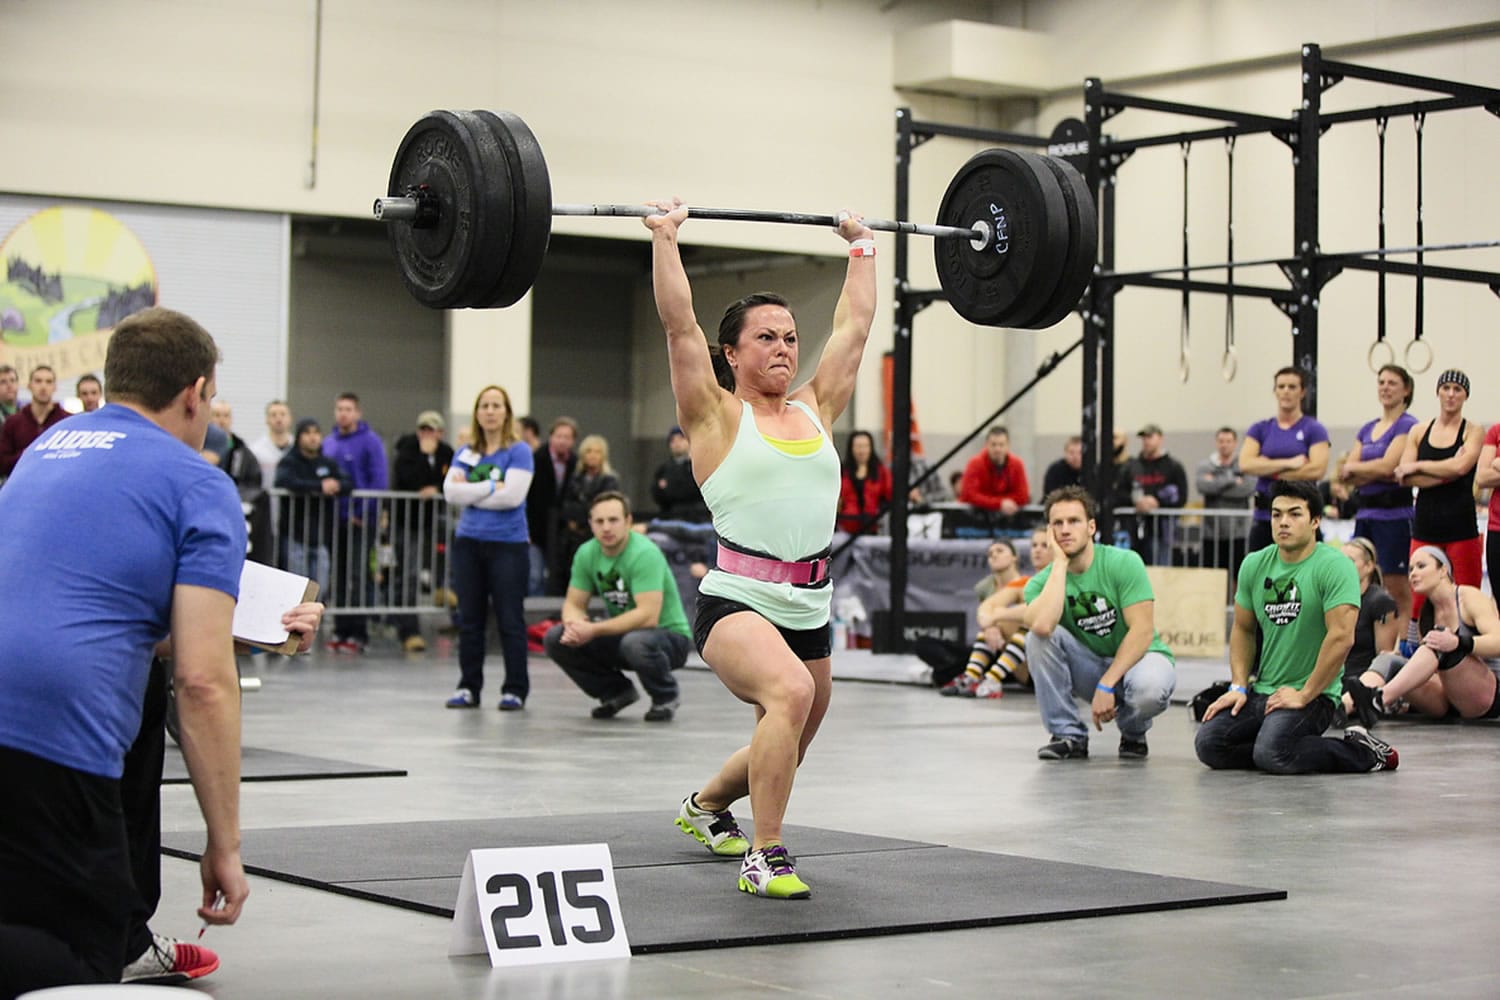 Jessica Core of Vancouver lifts 215 pounds over her head during the CrossFit Fort Vancouver Invitational.